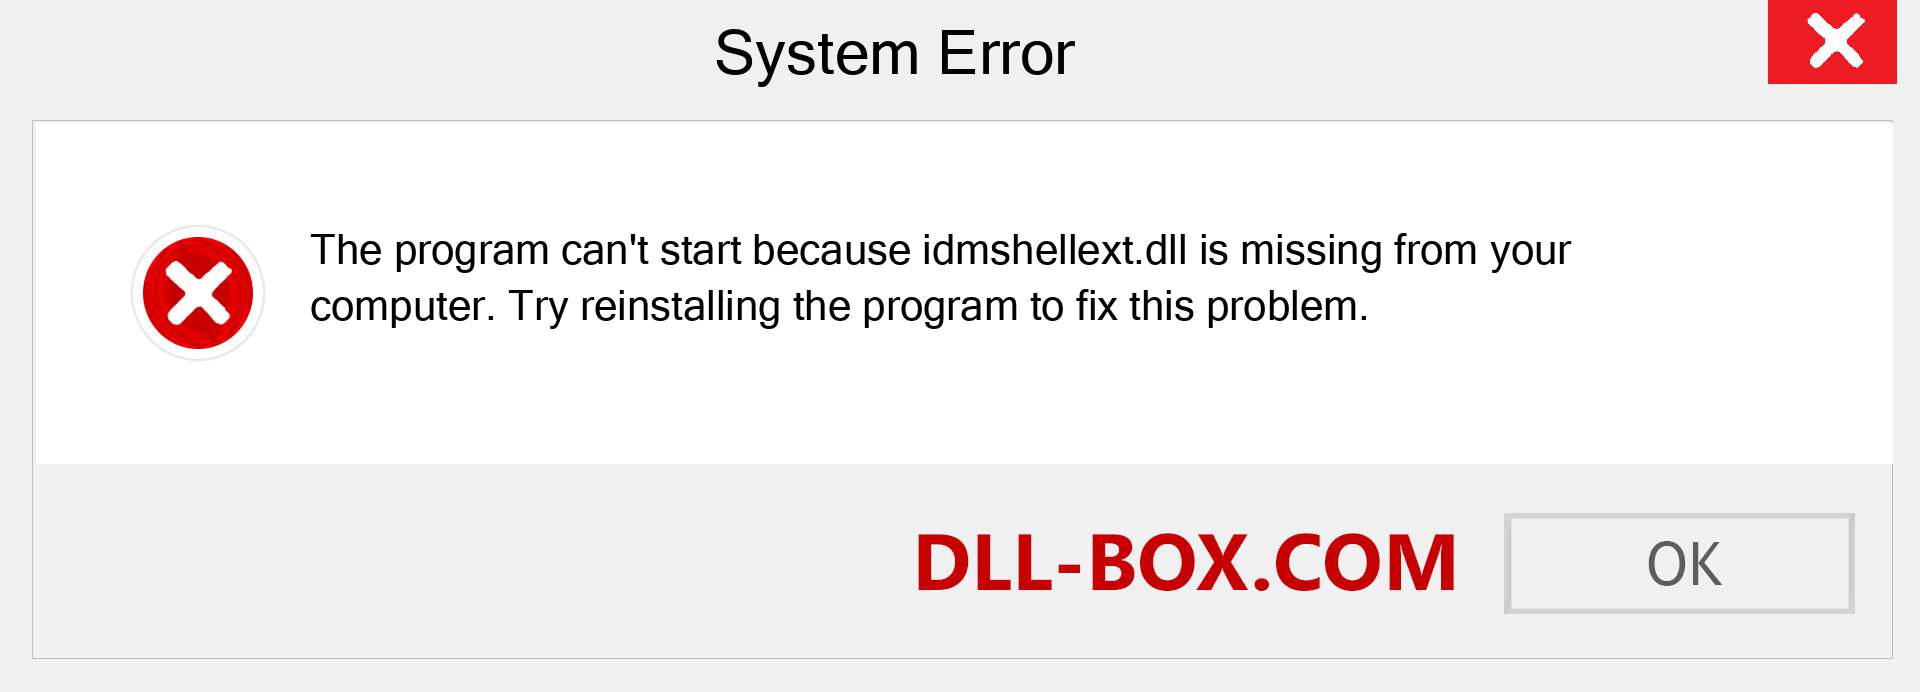  idmshellext.dll file is missing?. Download for Windows 7, 8, 10 - Fix  idmshellext dll Missing Error on Windows, photos, images